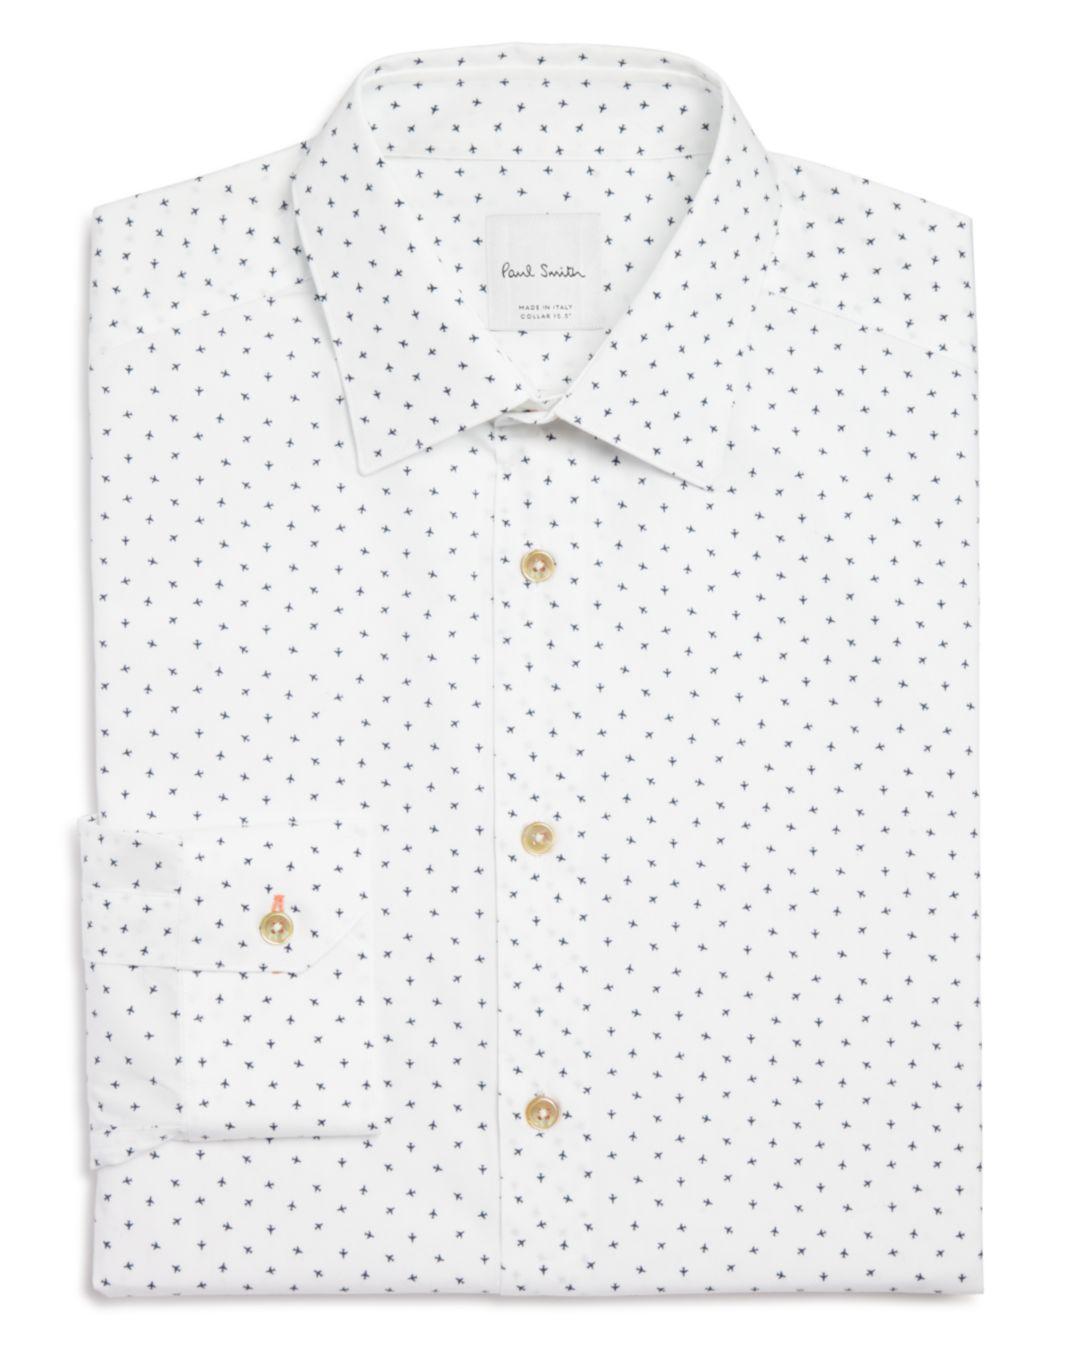 Paul Smith Airplane Print Slim Fit Dress Shirt in White for Men | Lyst